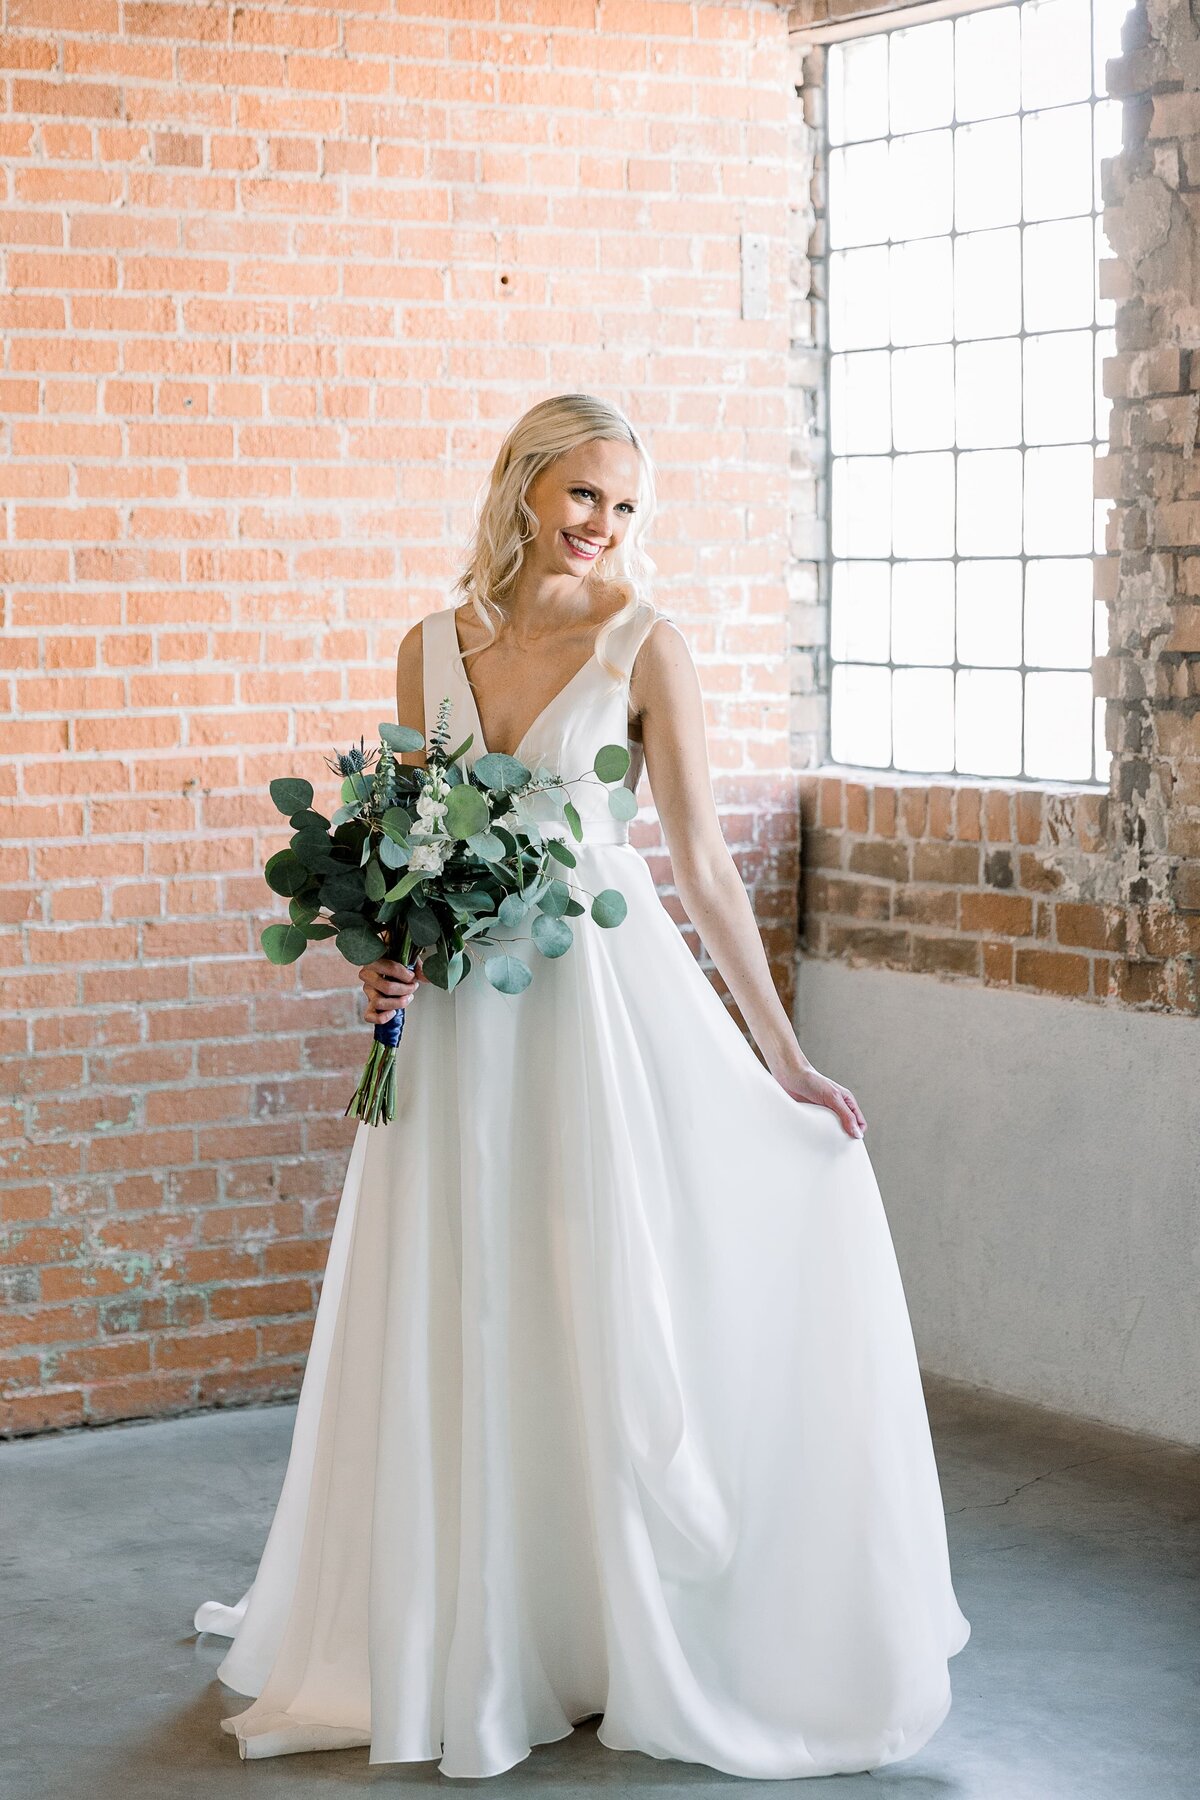 Warehouse-215-wedding-by-Leslie-Ann-Photography-00045